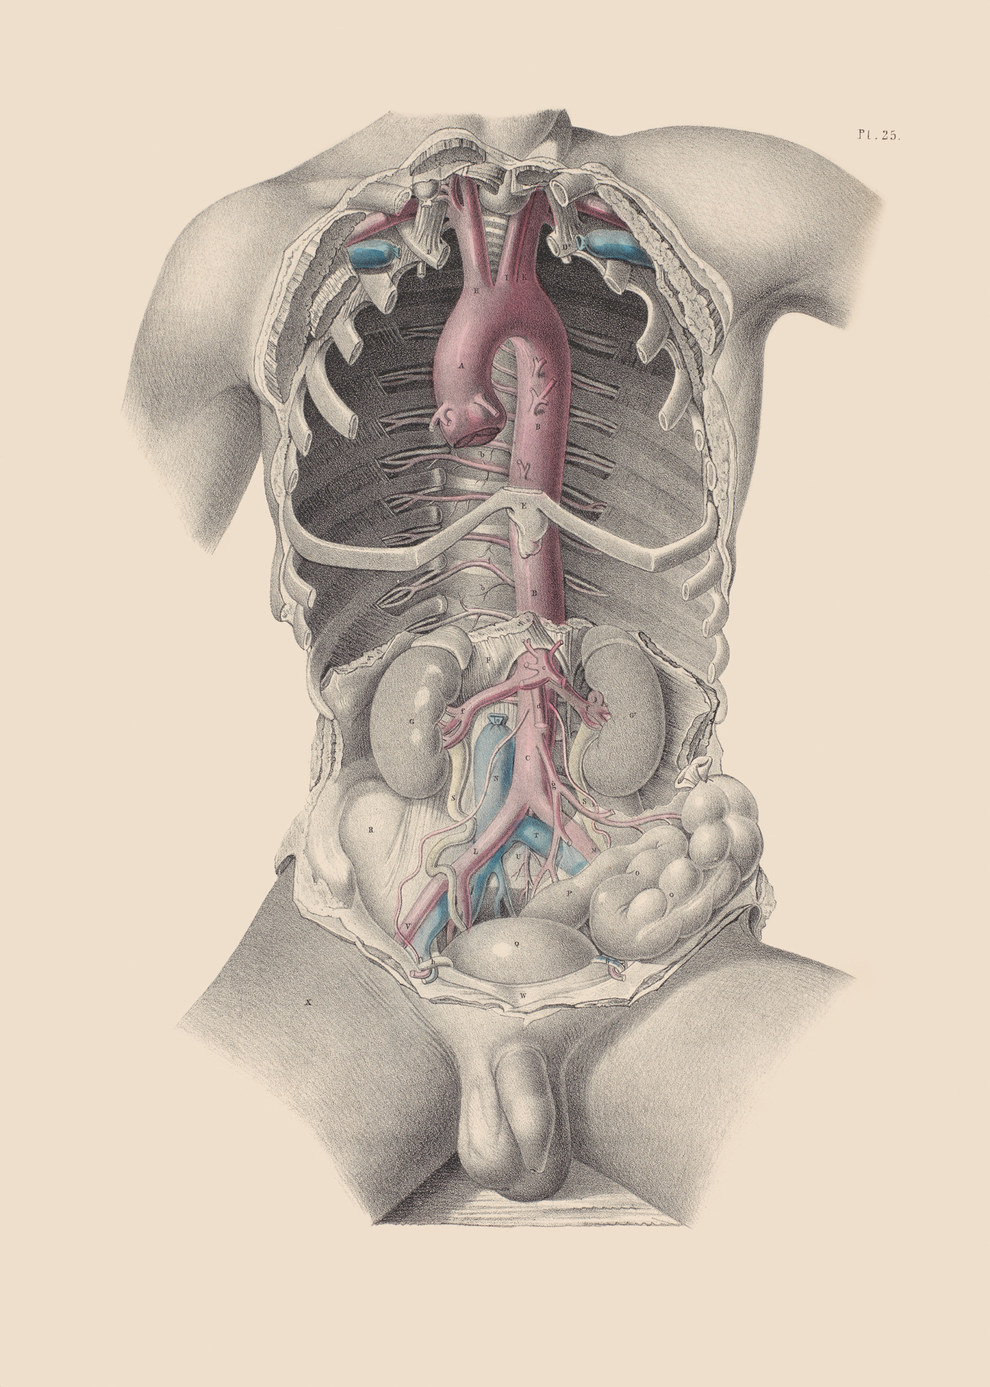 Dissection showing the aorta and the major arteries of the thorax (the bit inside the ribcage) and abdomen.